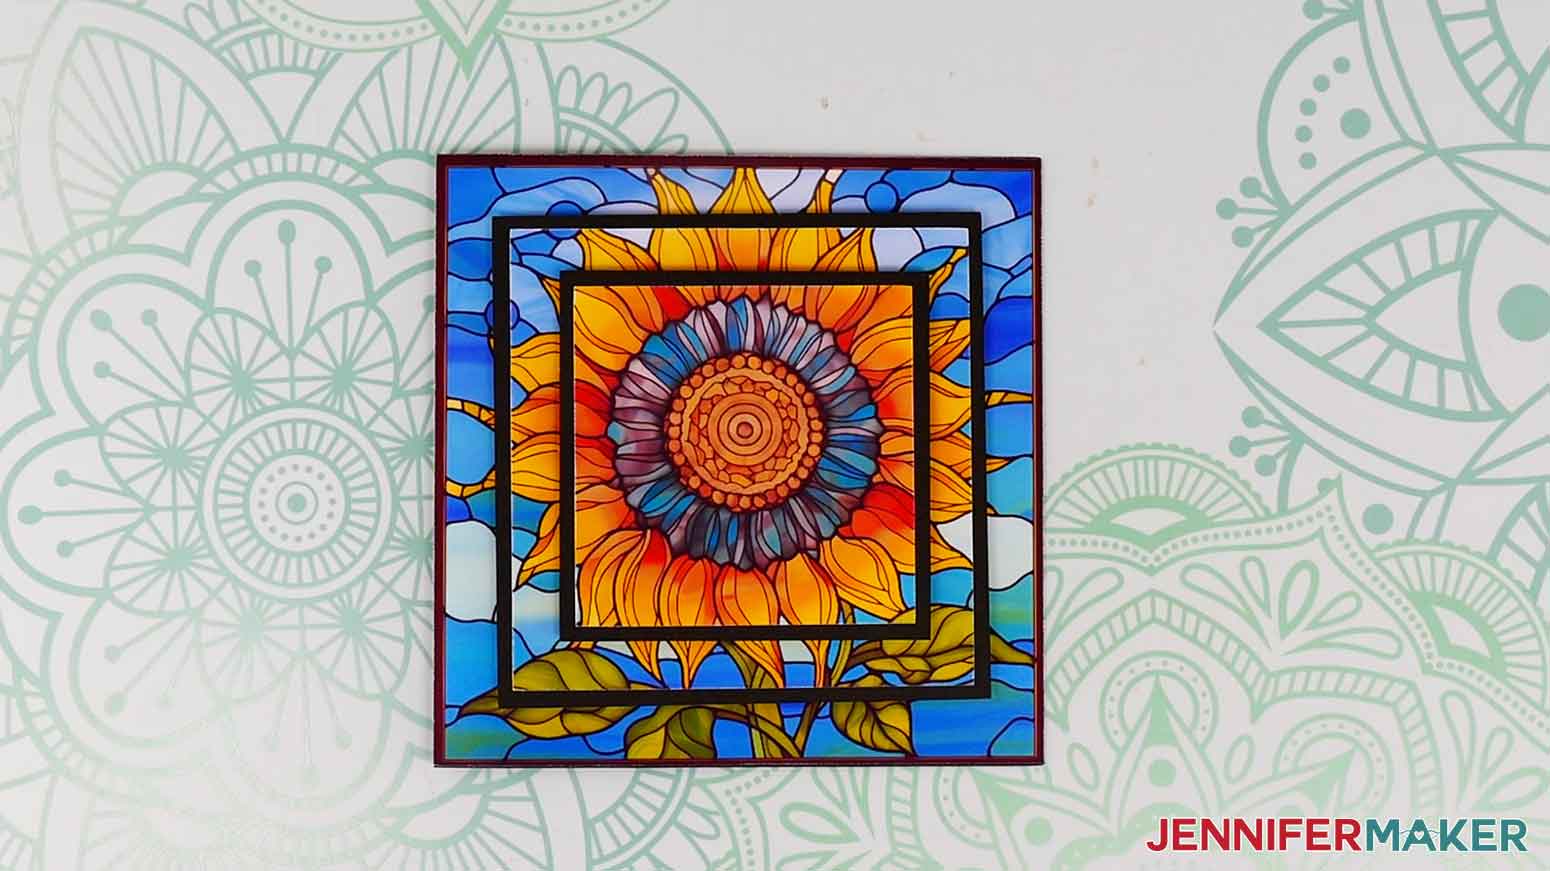 Complete square stained glass card with sunflower design.